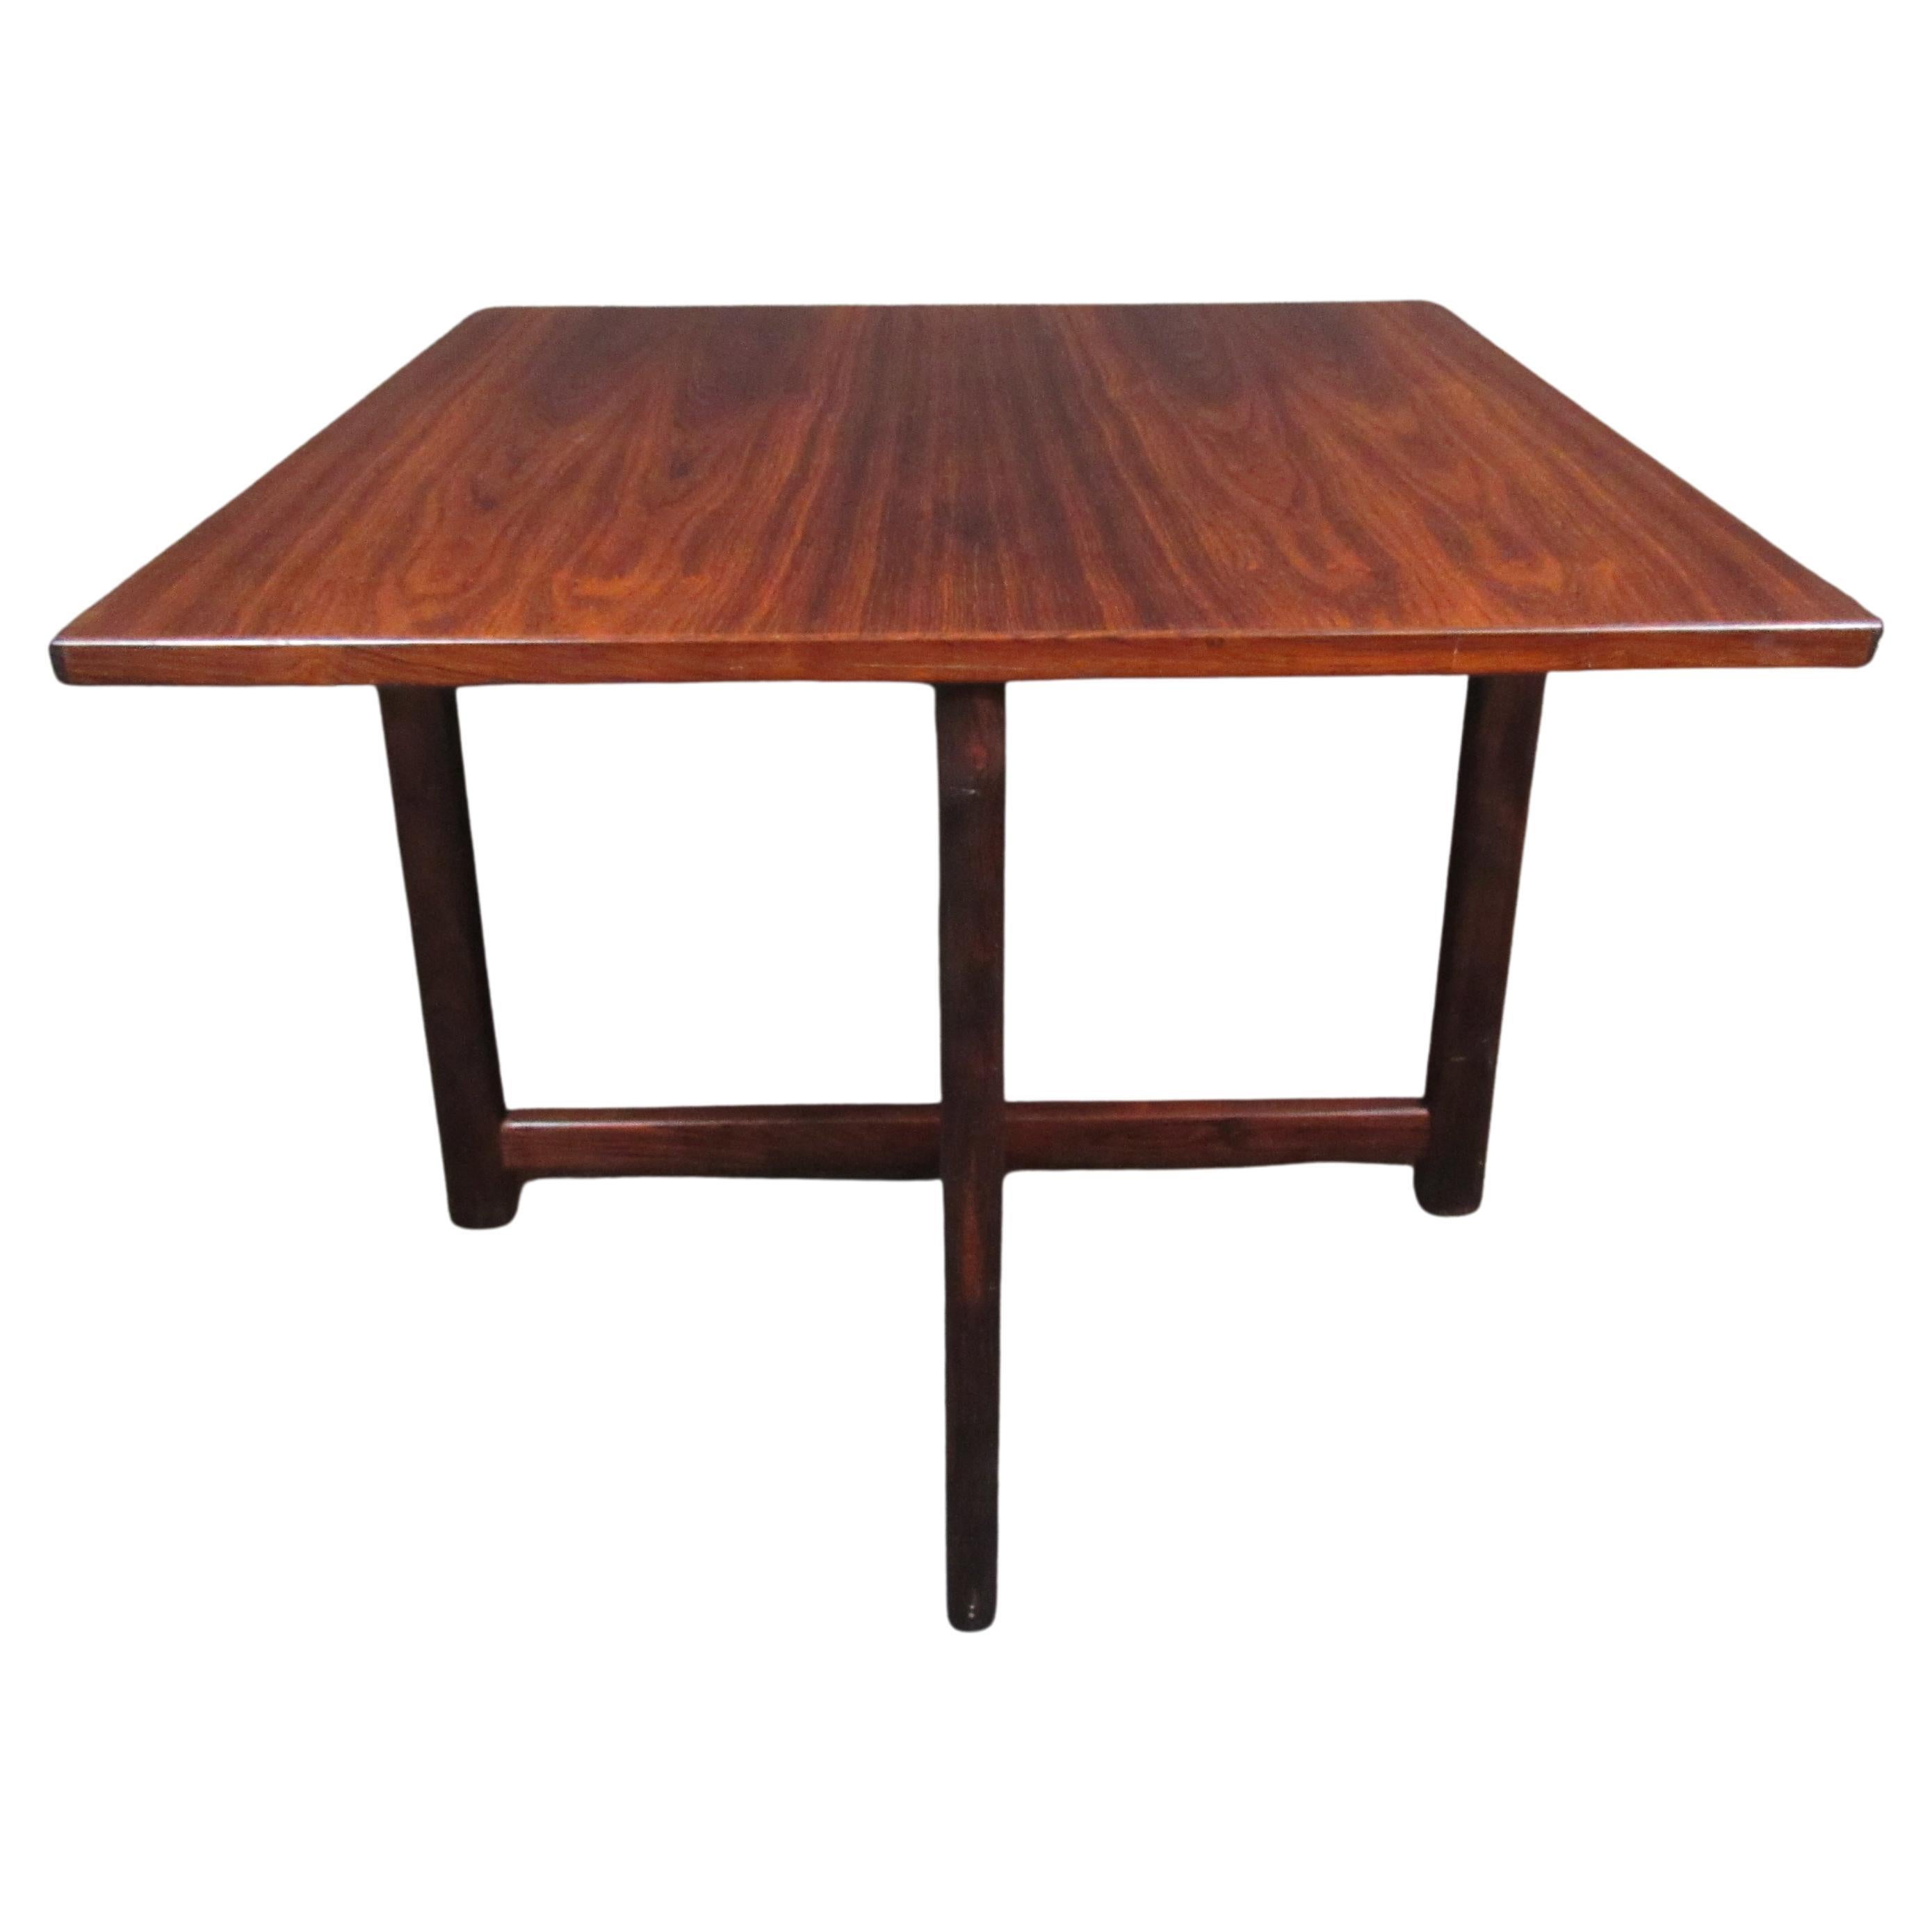 Stunning small table from Denmark's Durup Polstermøbelfabrik. A gorgeous rosewood tabletop is sure to impress with it's rich, natural grain. Crossed leg struts provide both aesthetics and stability. 
Please confirm item pickup location (New York or